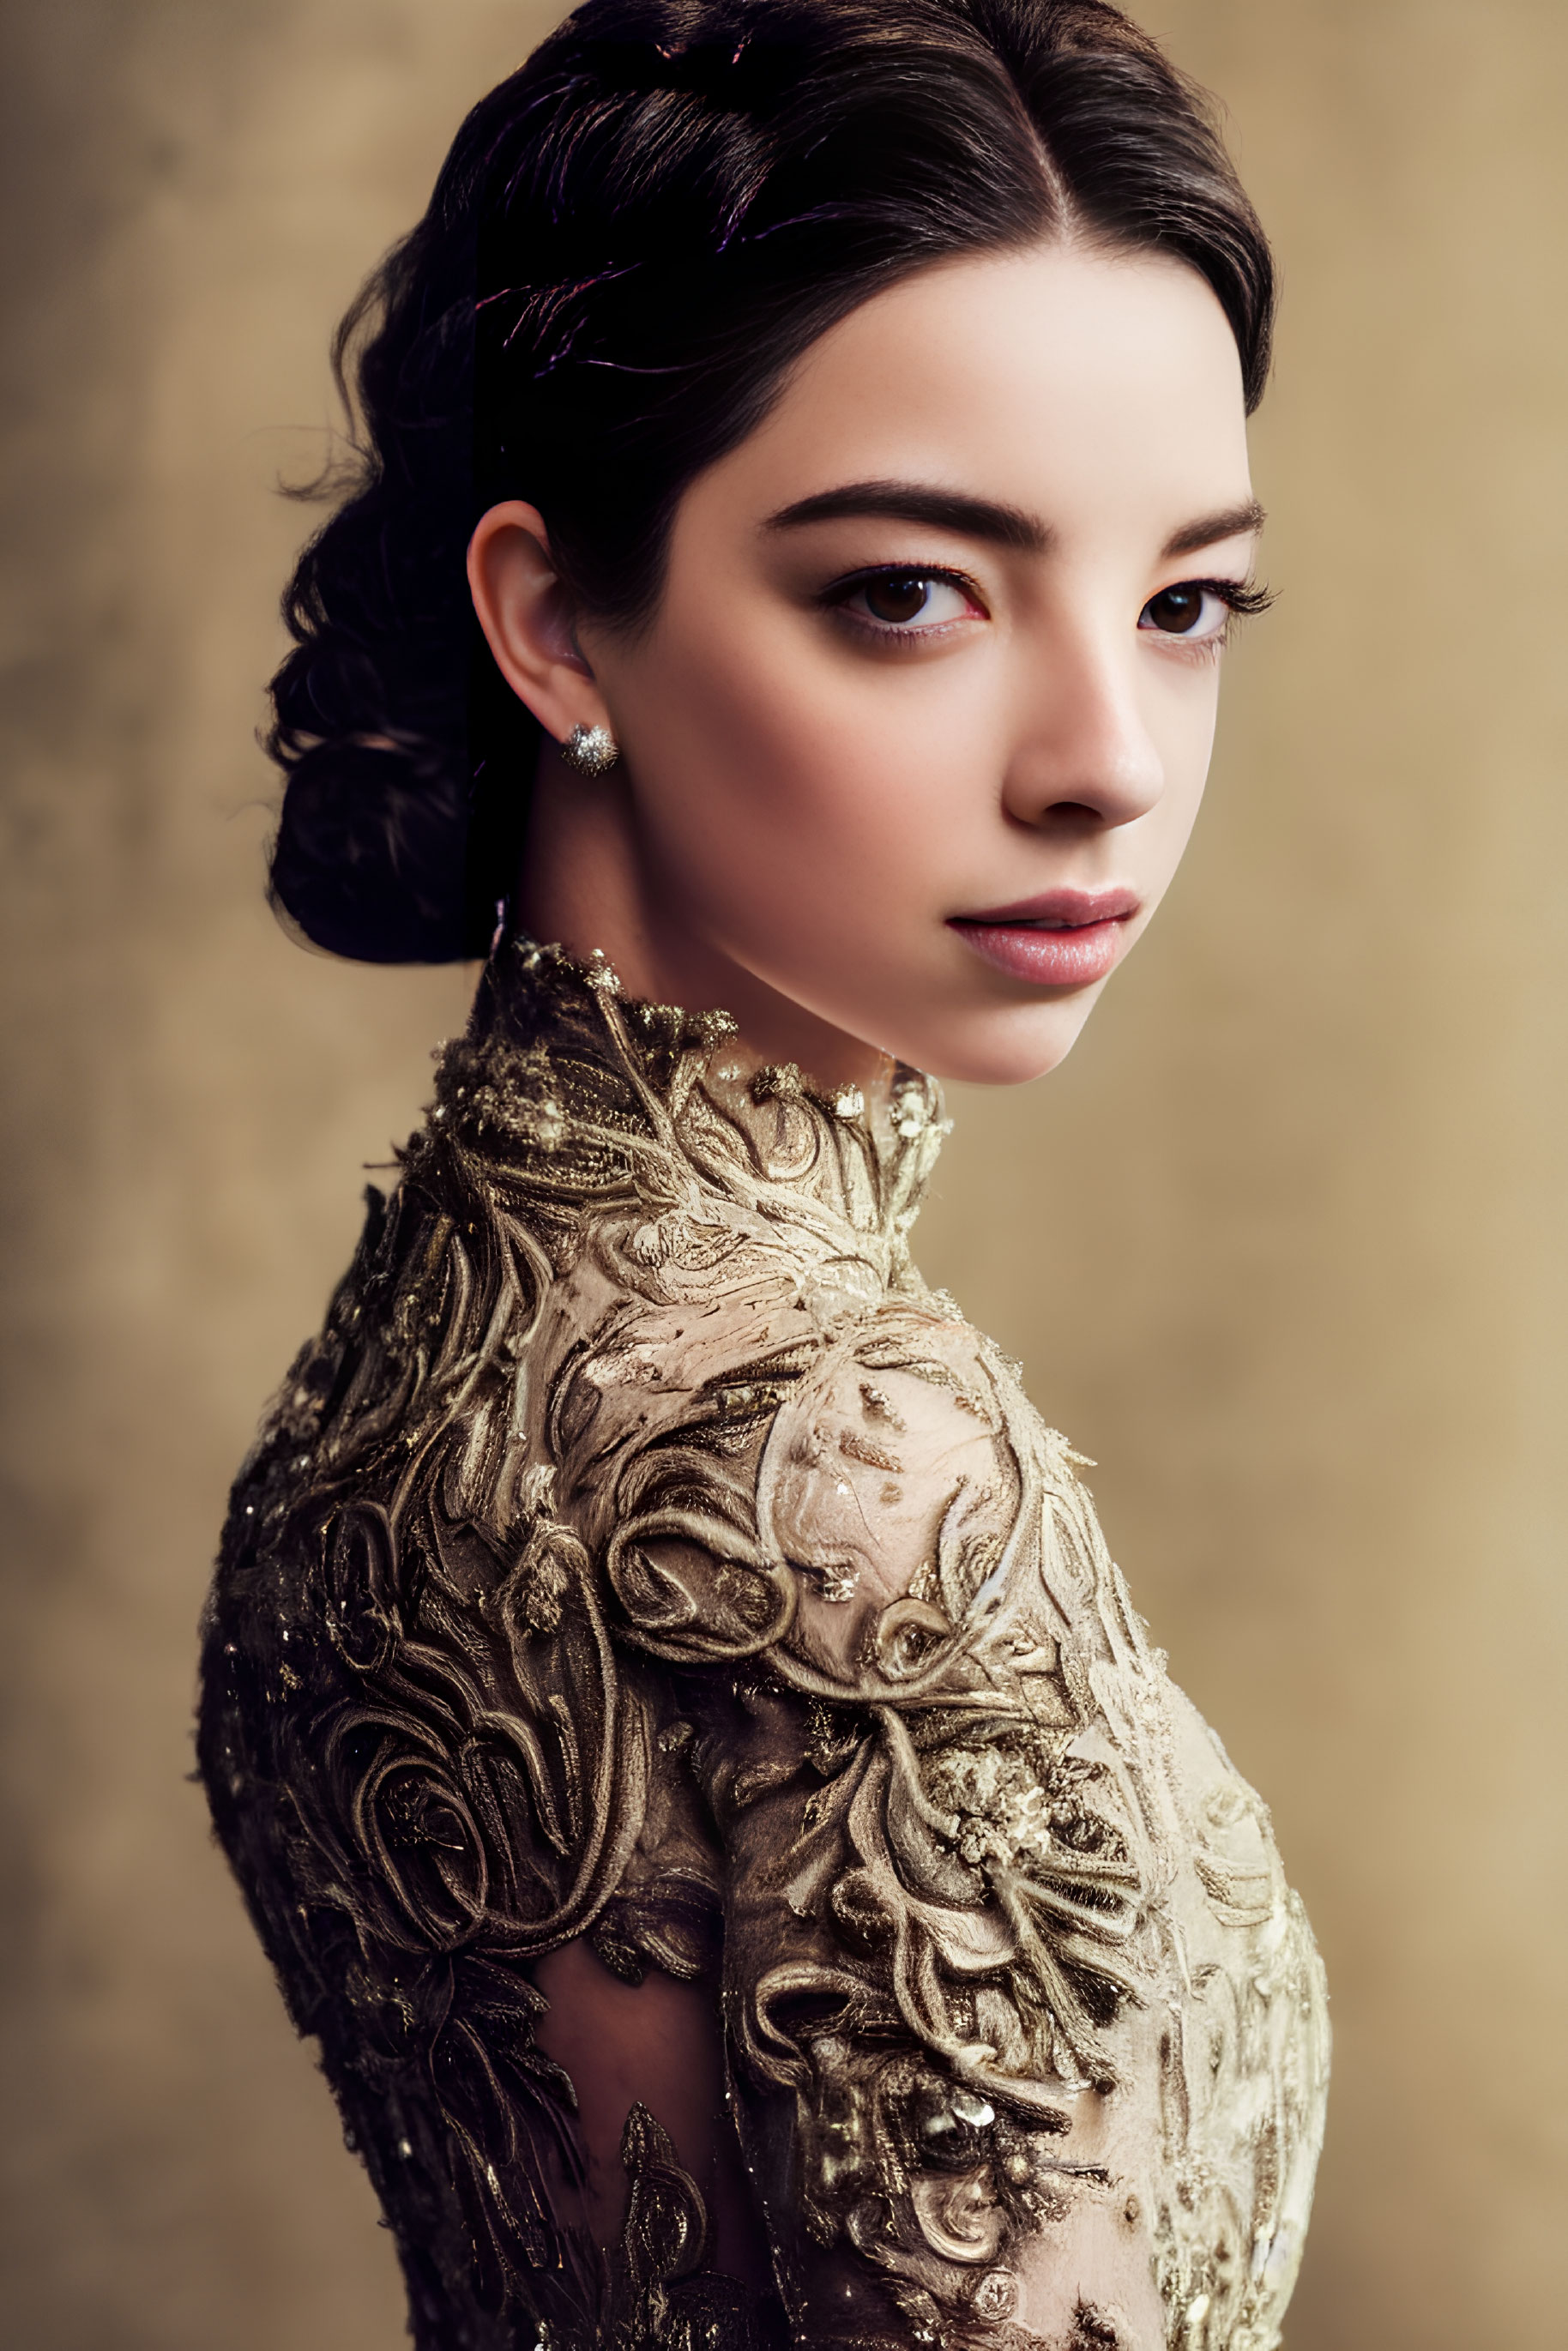 Elegant woman in gold-embroidered dress with striking makeup